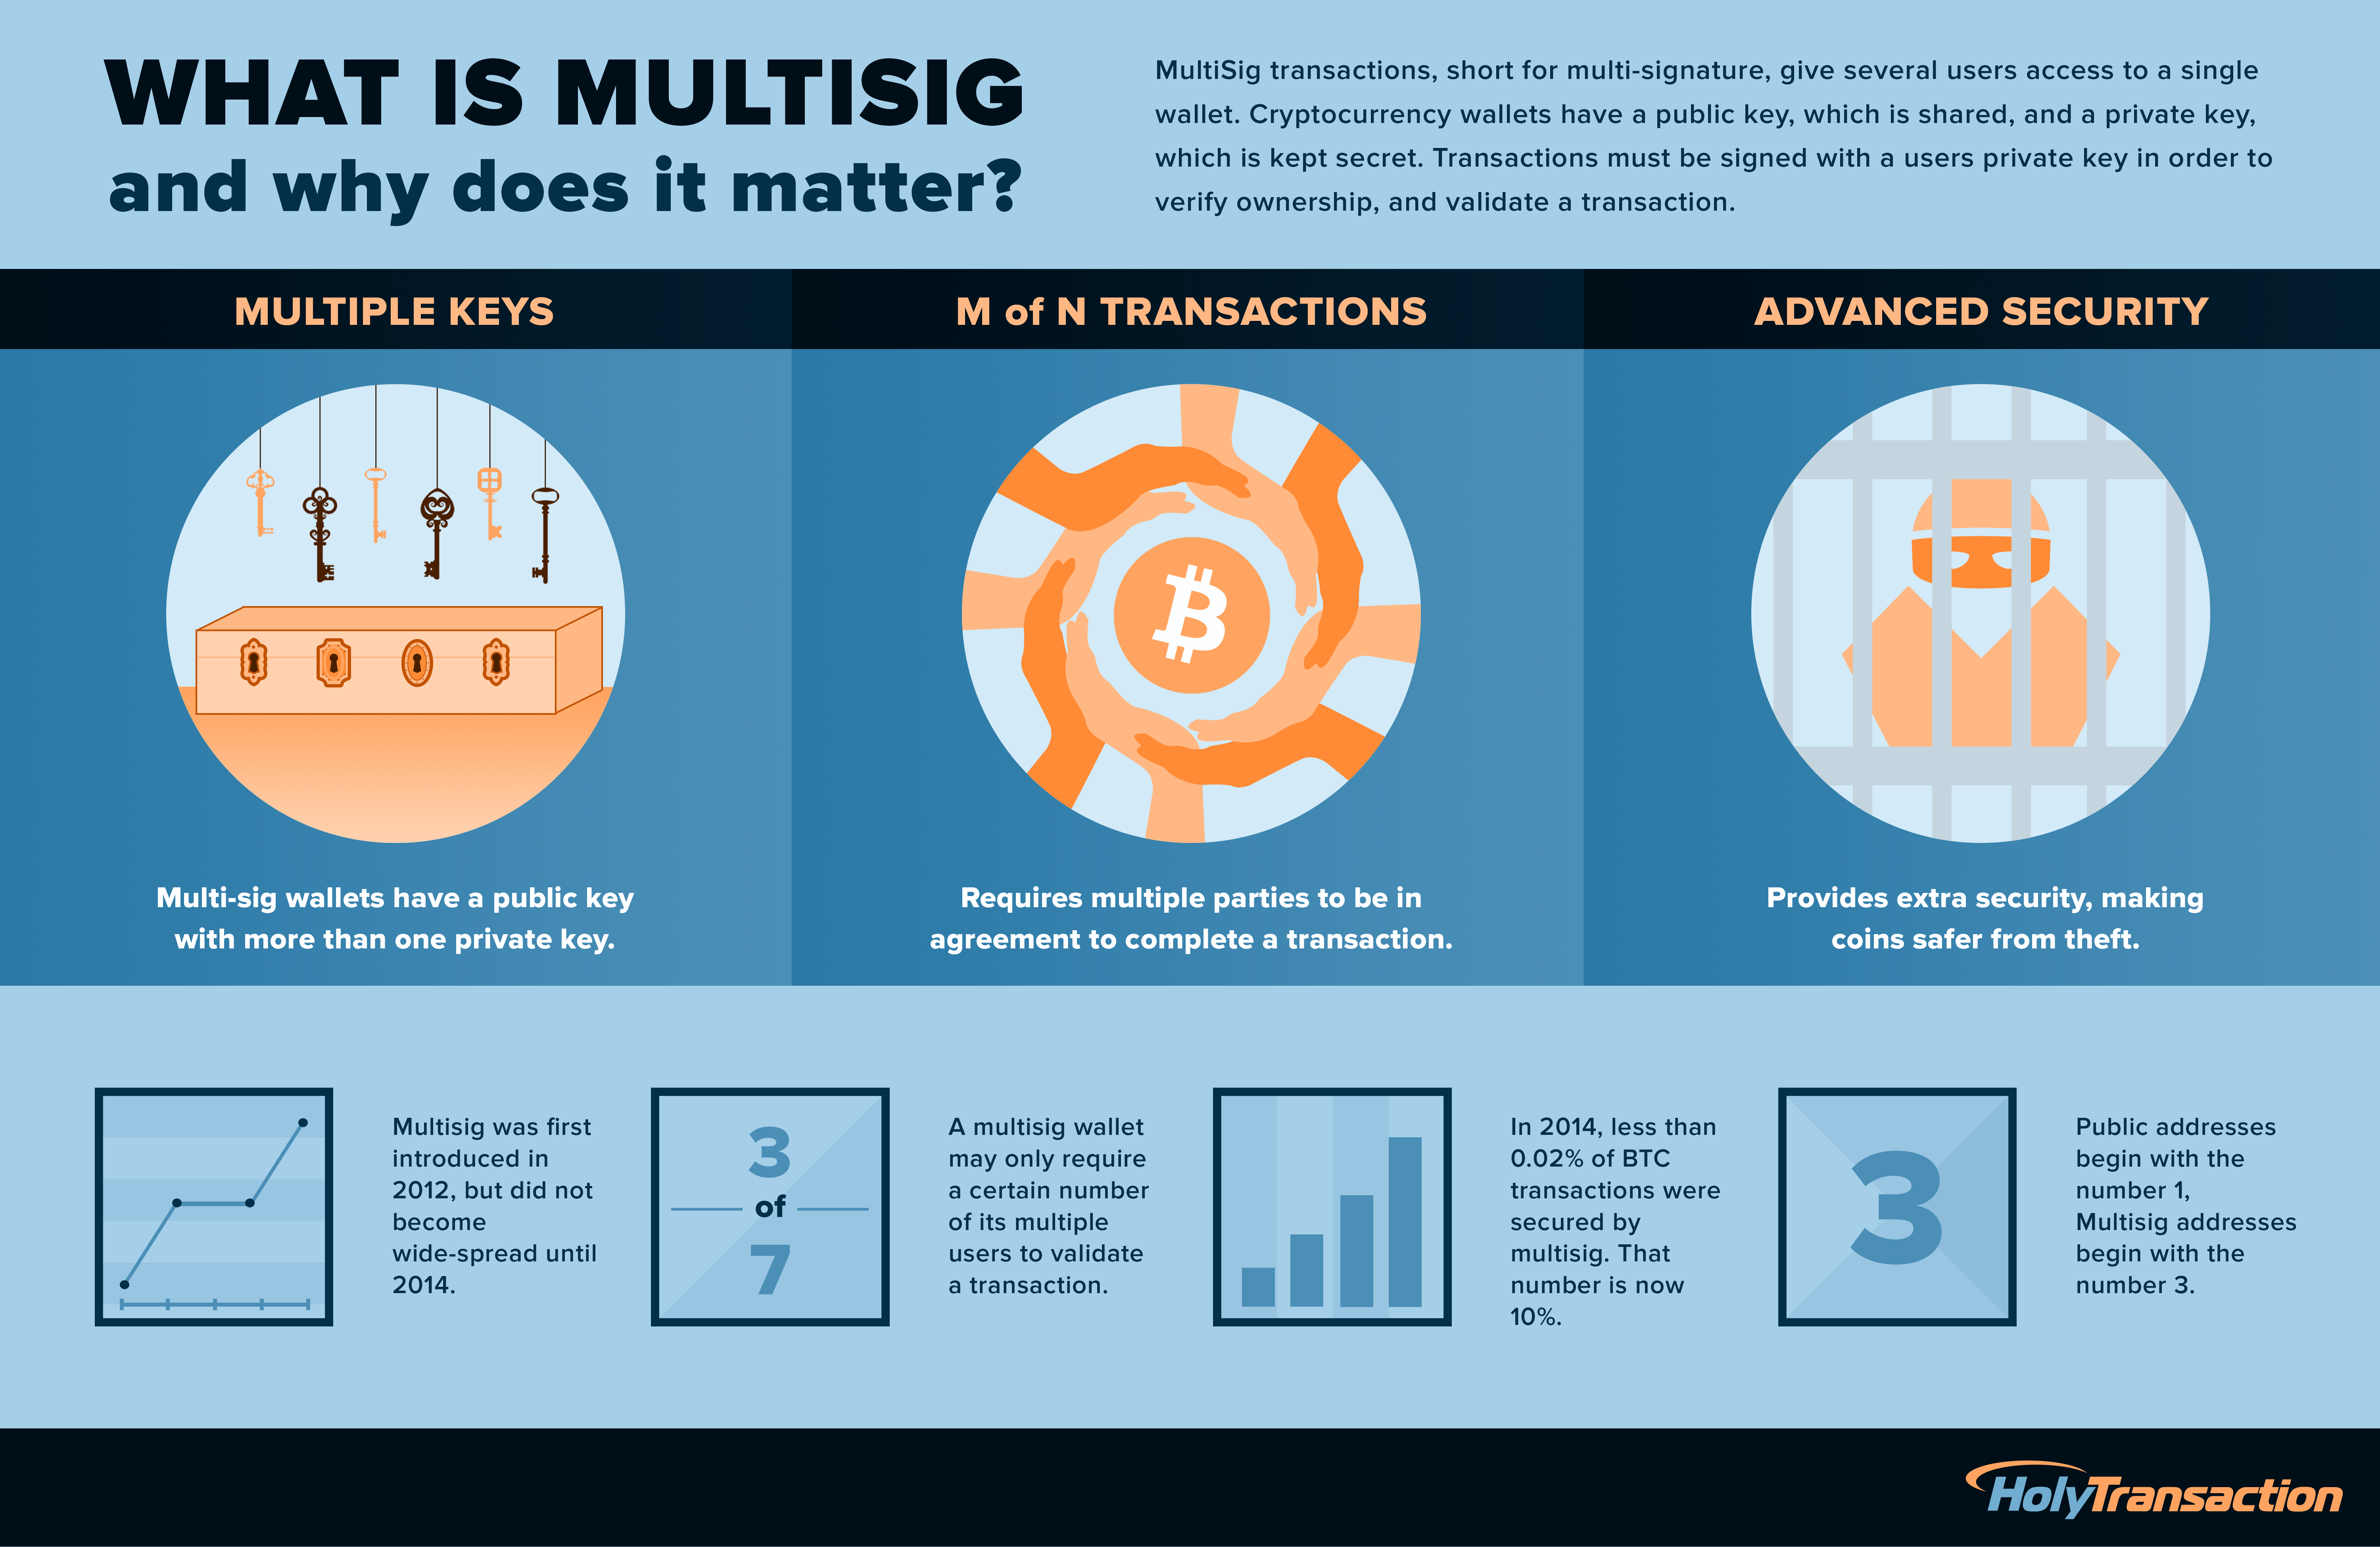 What is Multisig and why does it matter?